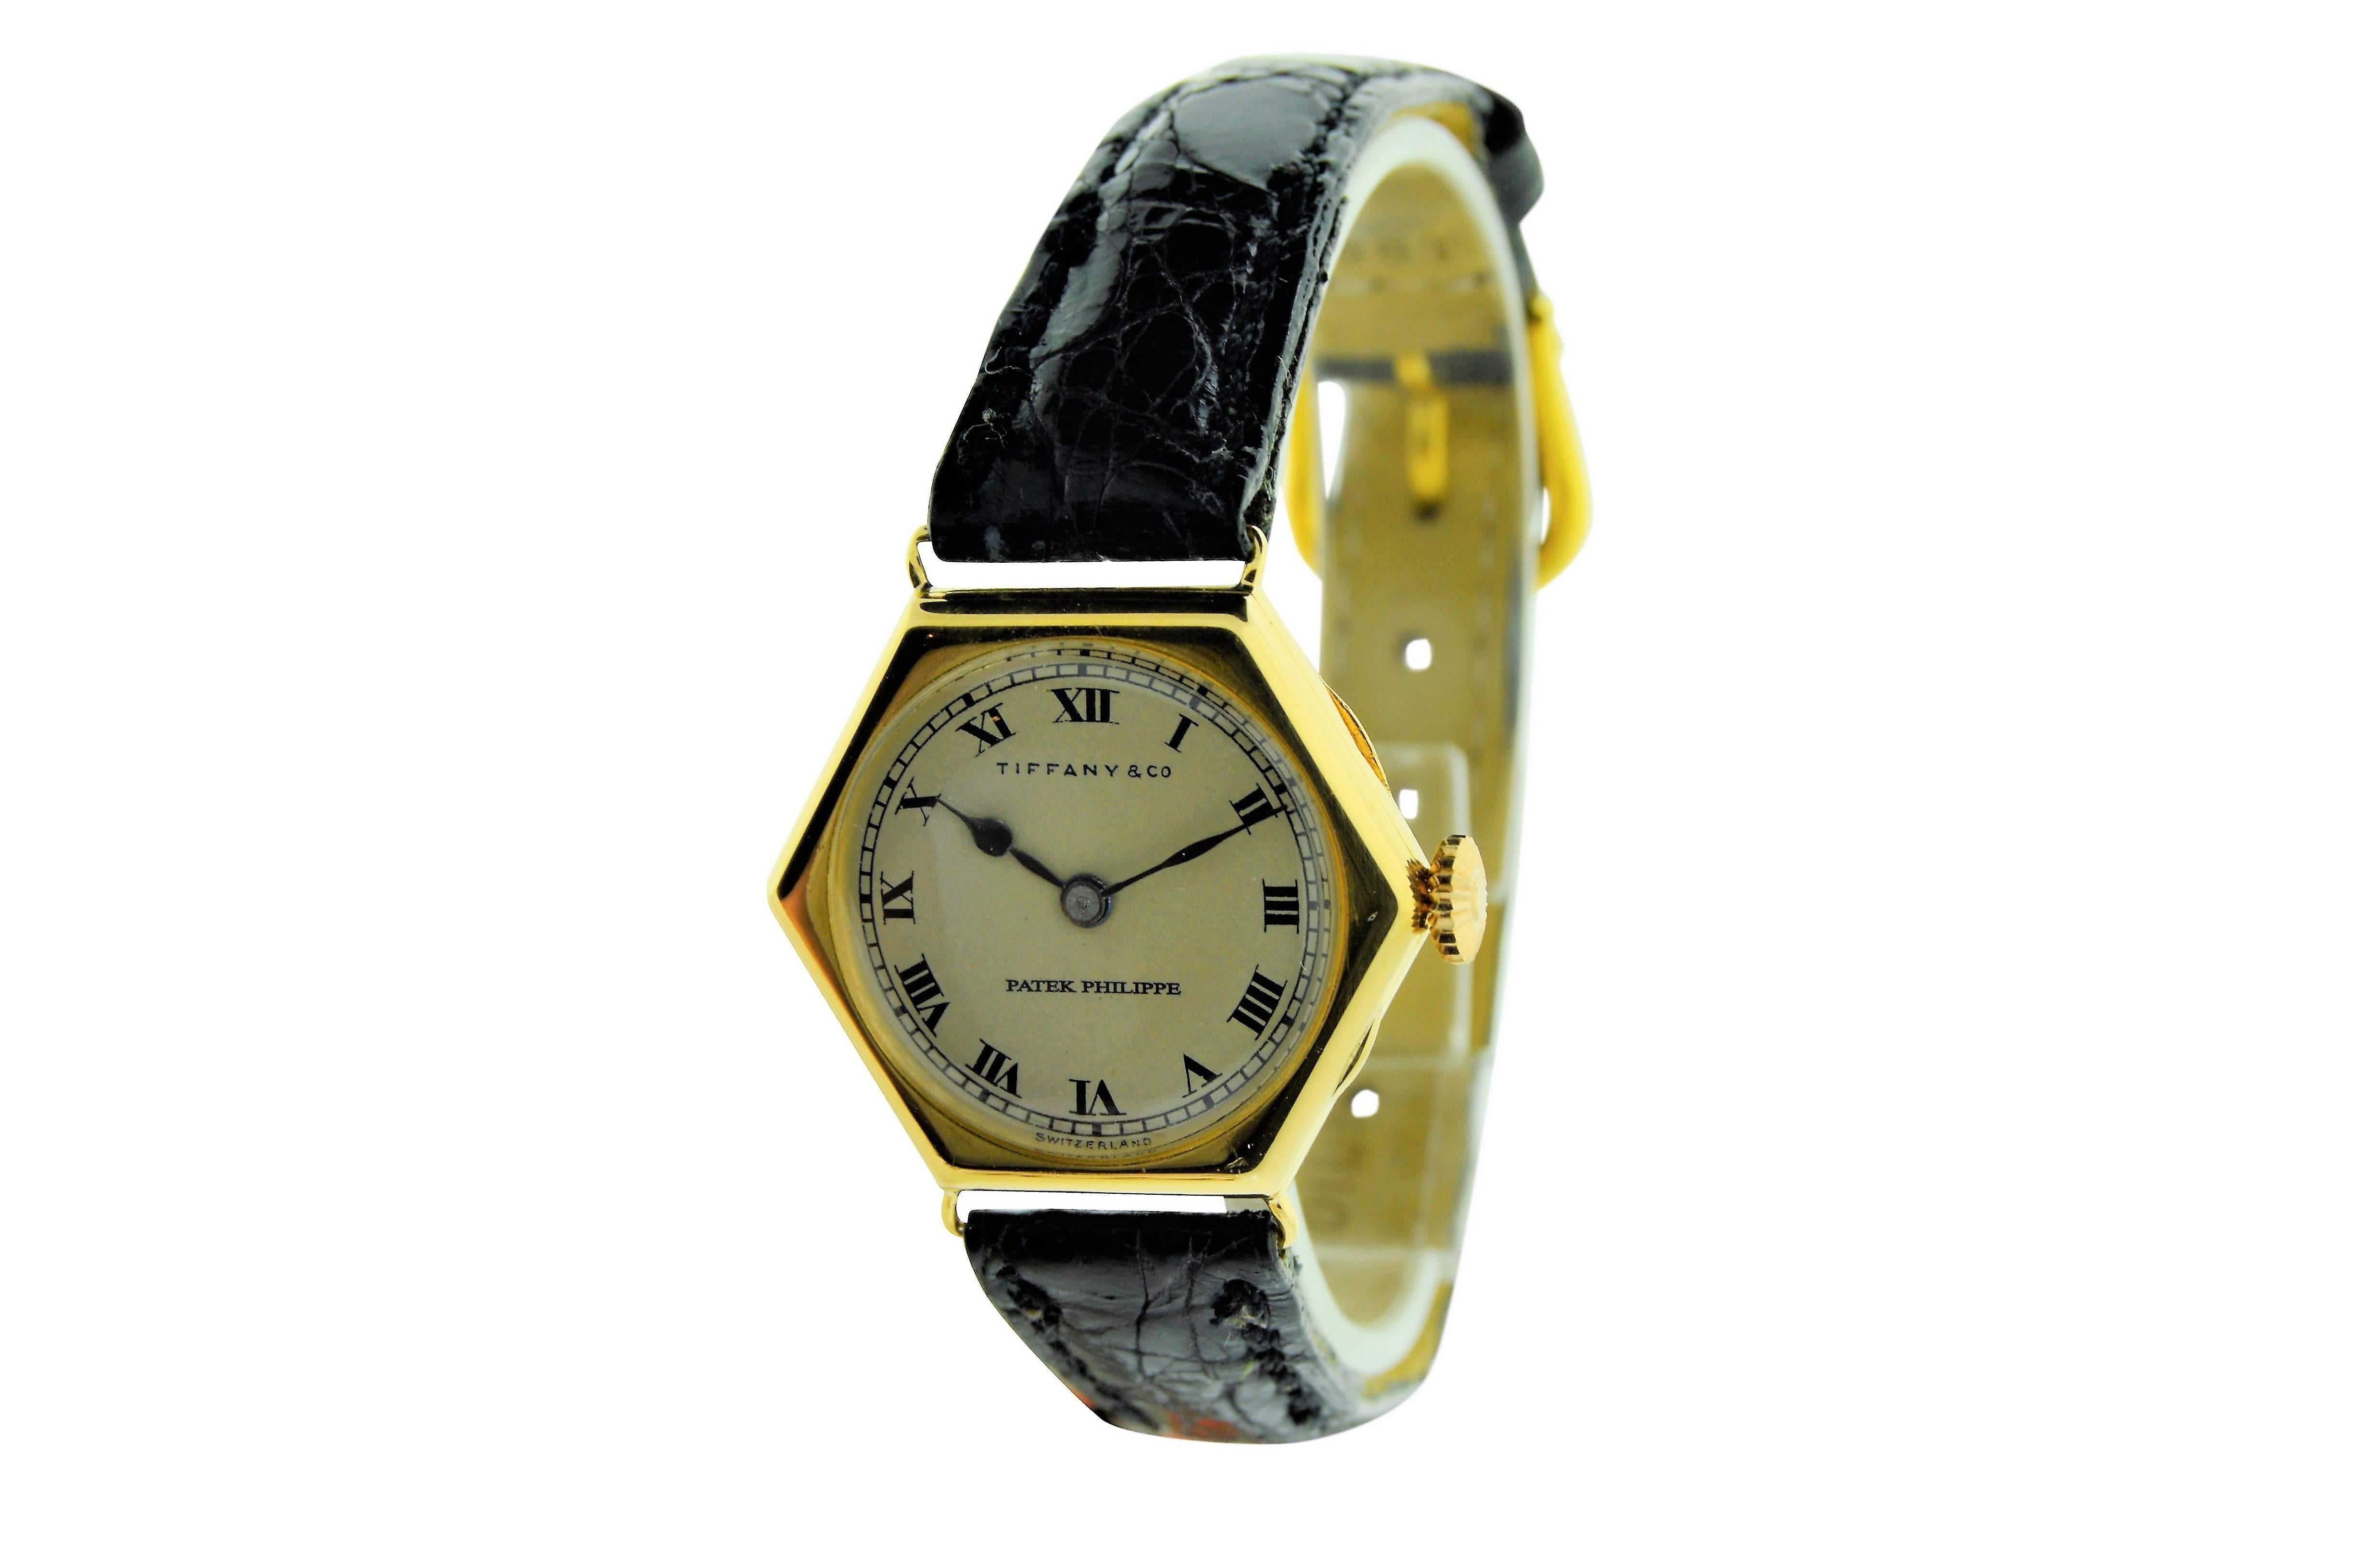 FACTORY / HOUSE: Patek Philippe and Company
STYLE / REFERENCE: Art Deco 
METAL / MATERIAL: 18 Kt Yellow Gold 
DIMENSIONS: 27mm X 26mm
CIRCA: 1918 / 1920
MOVEMENT / CALIBER: Manual Winding / 18 Jewels / 8 Adjustments
DIAL / HANDS: Original Silvered